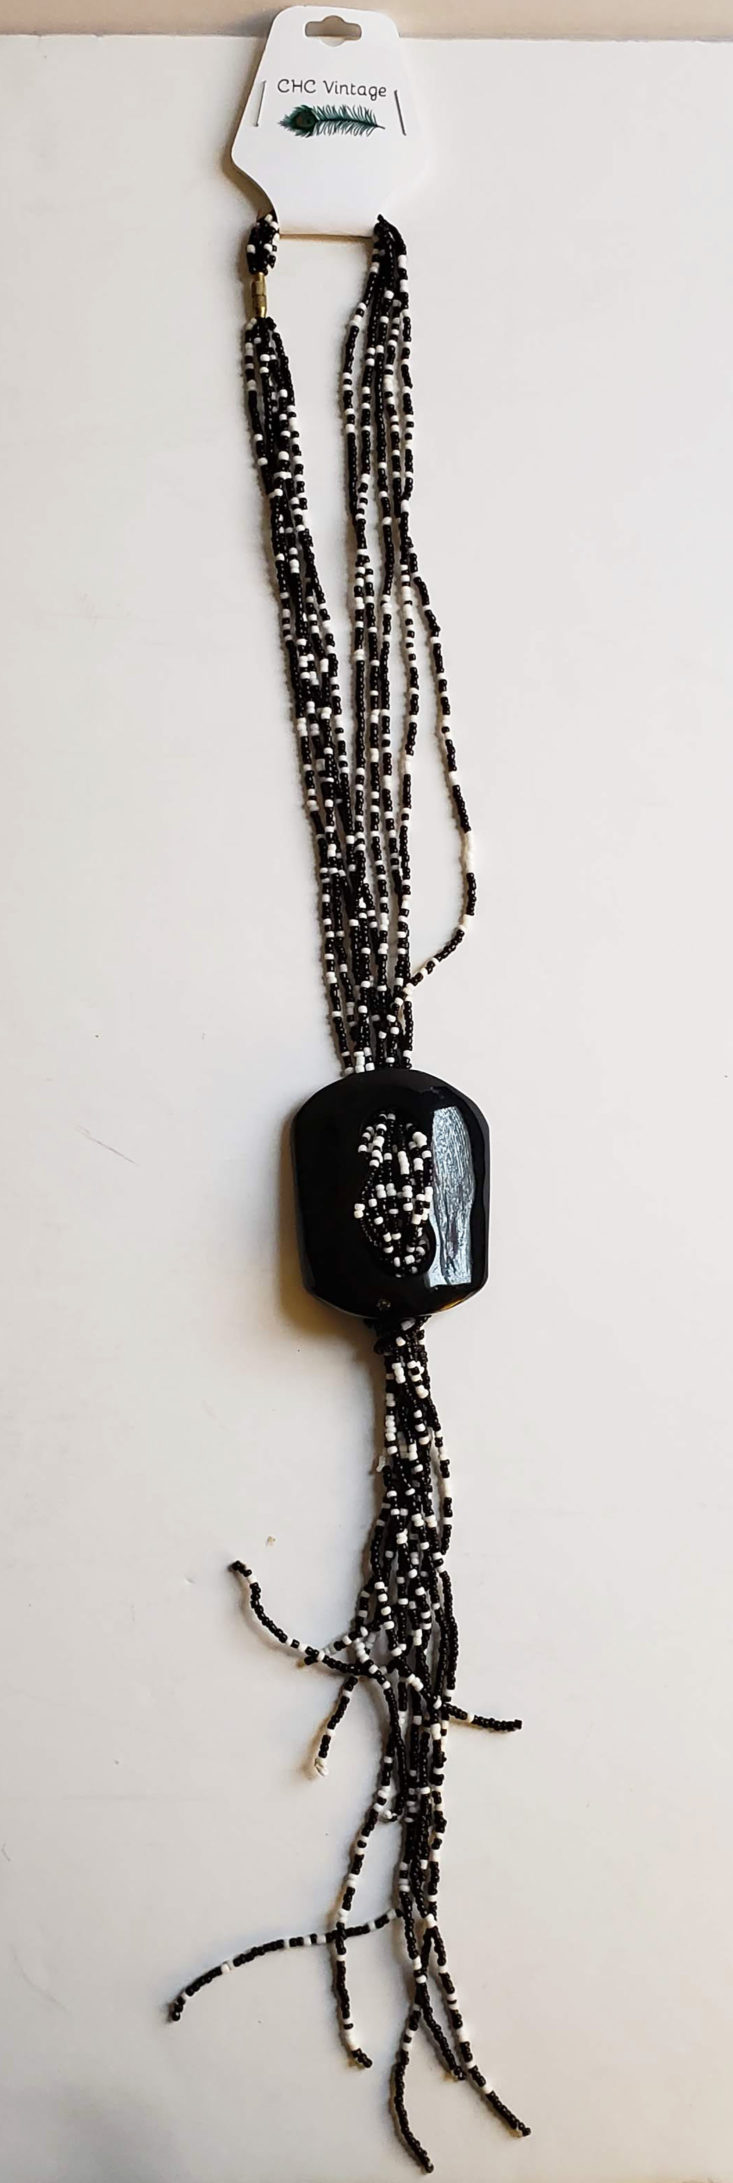 Crazy Hot Clothes Vintage Accessory January 2019 - Black And White Pony Bead Plastic Buckle Necklace 1